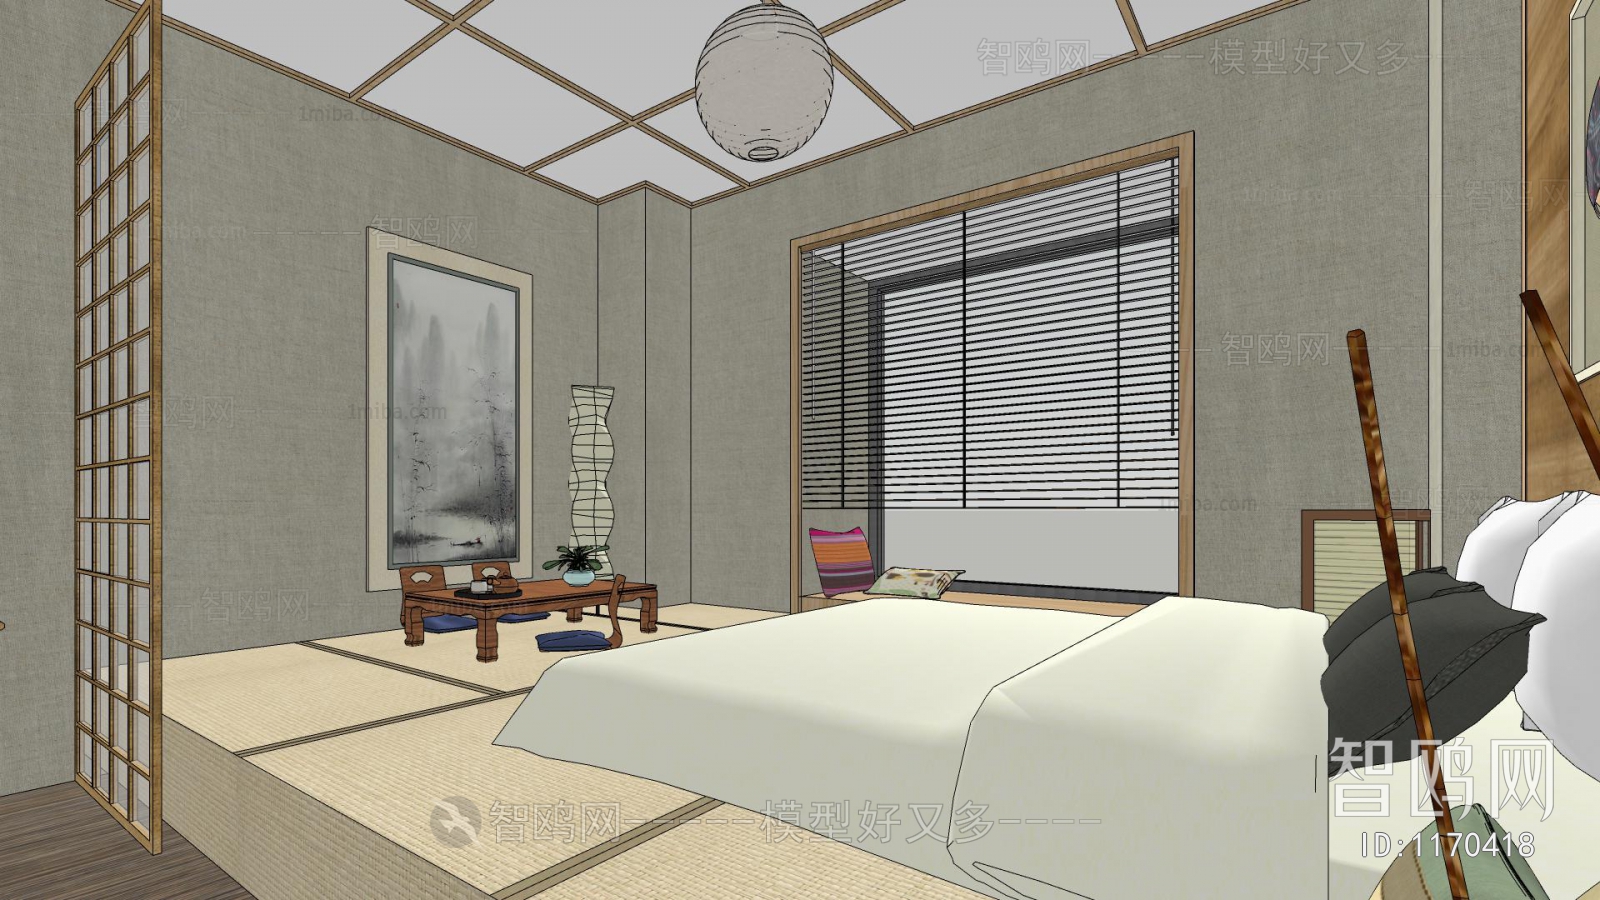 Japanese Style Guest Room